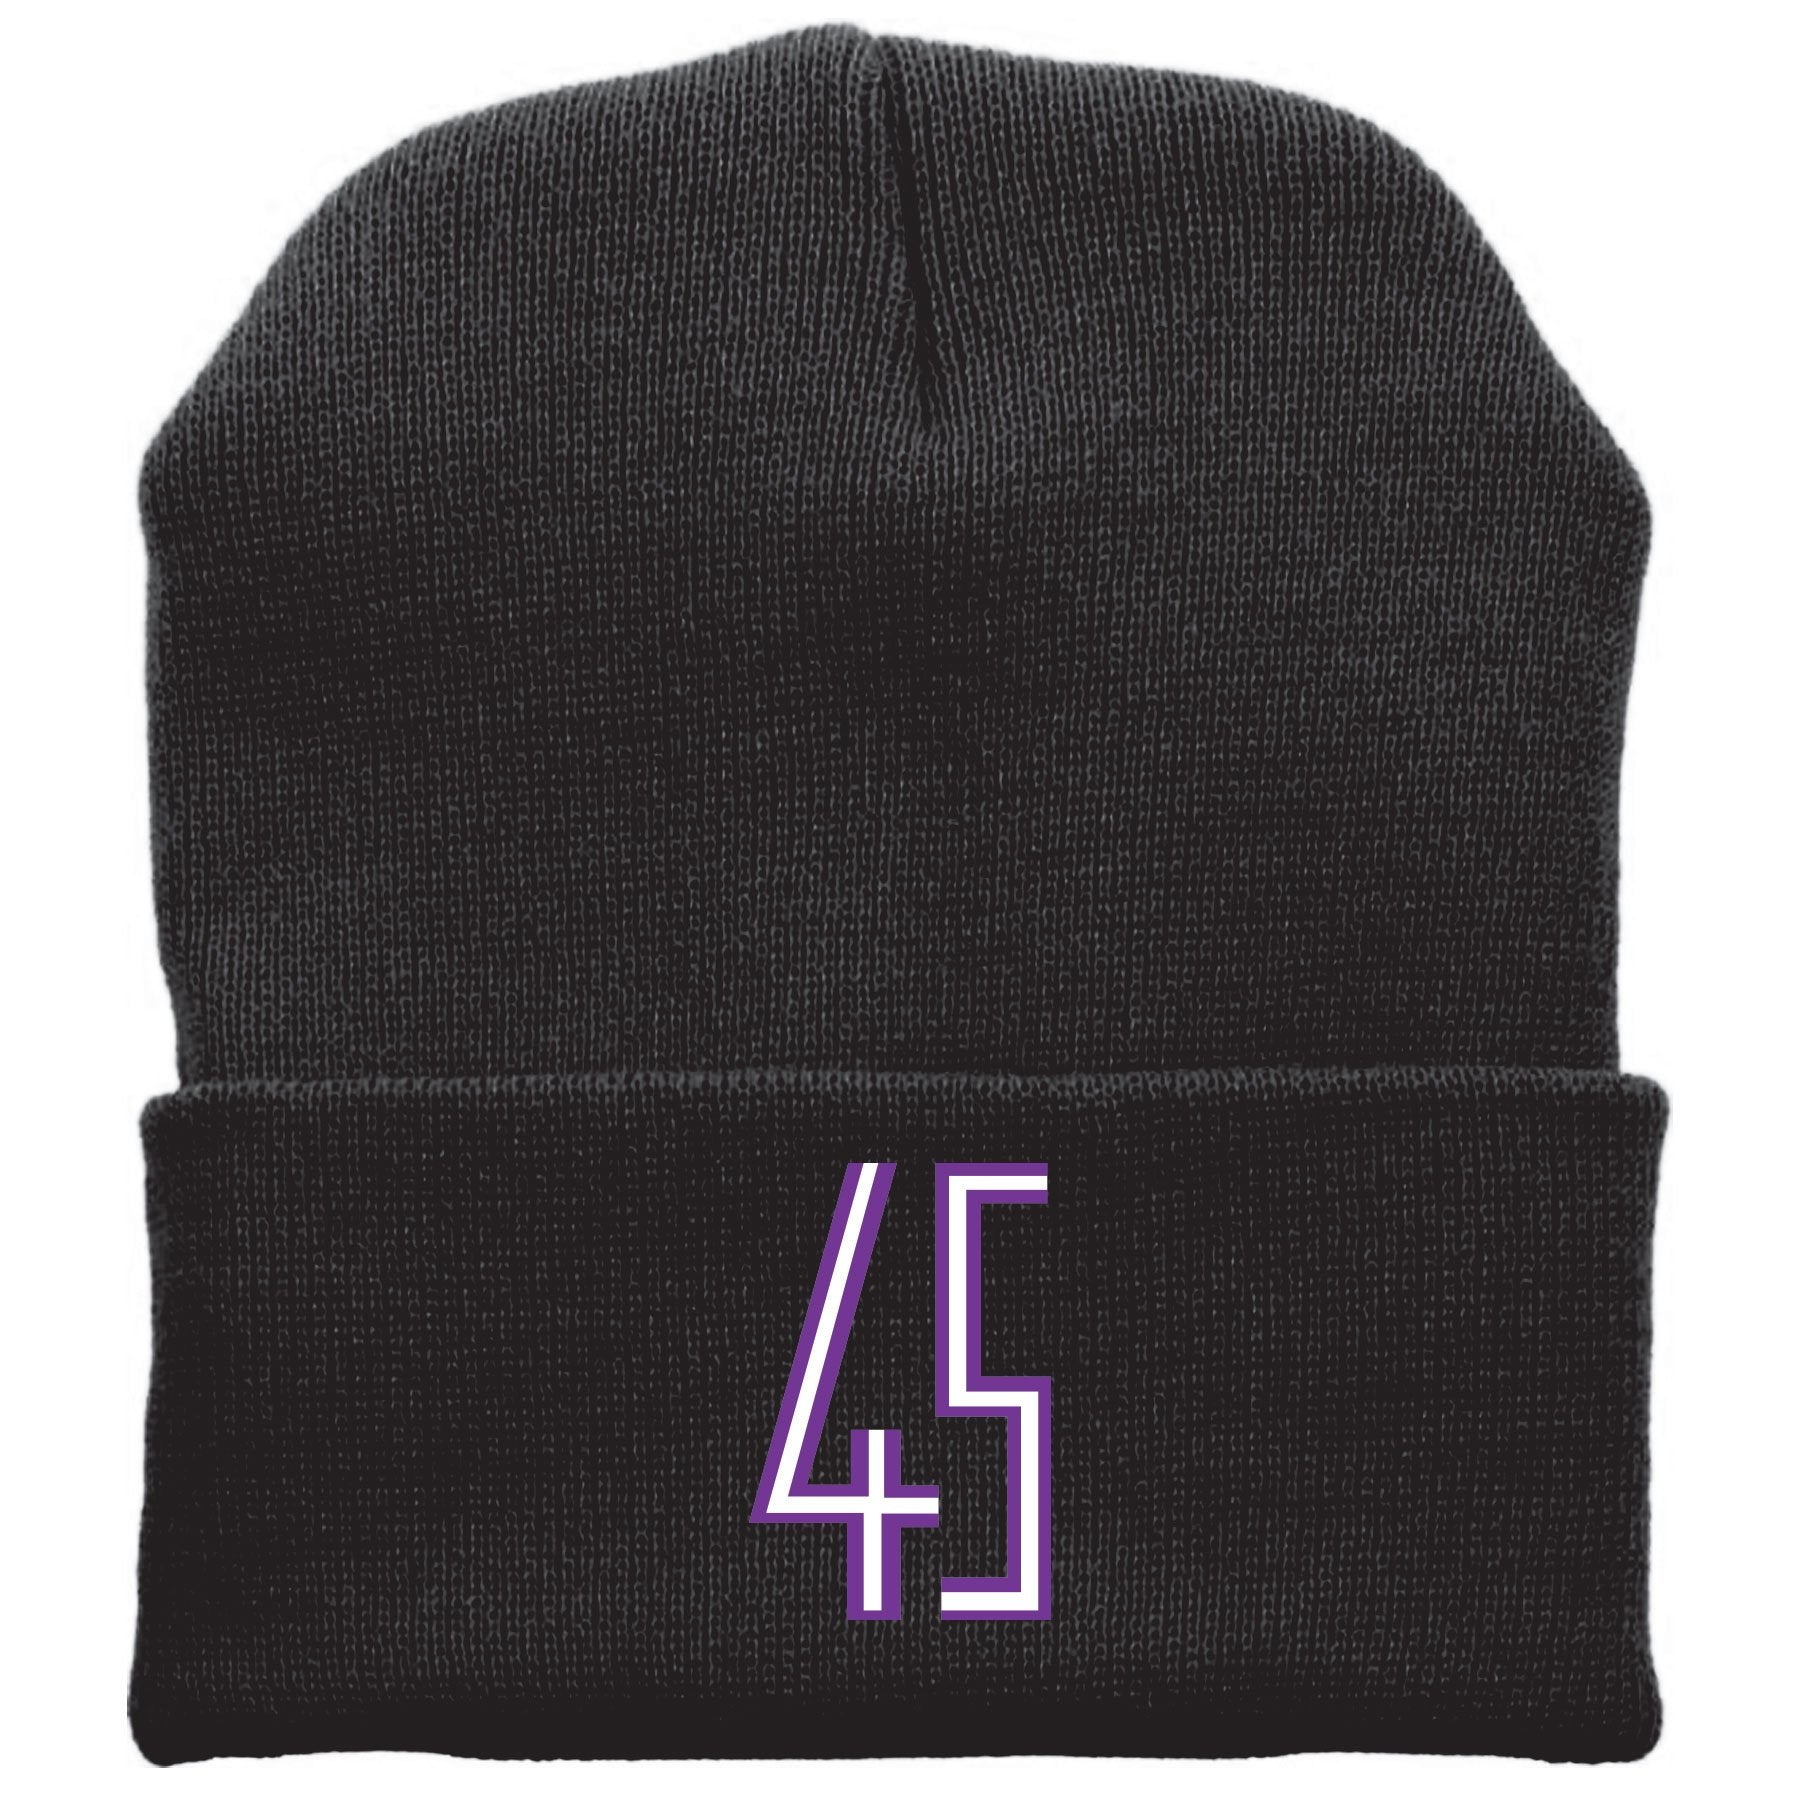 Embroidered on the front of the black Jordan 11 Concord Sneaker Matching Winter Beanie is the 45 logo in purple and white